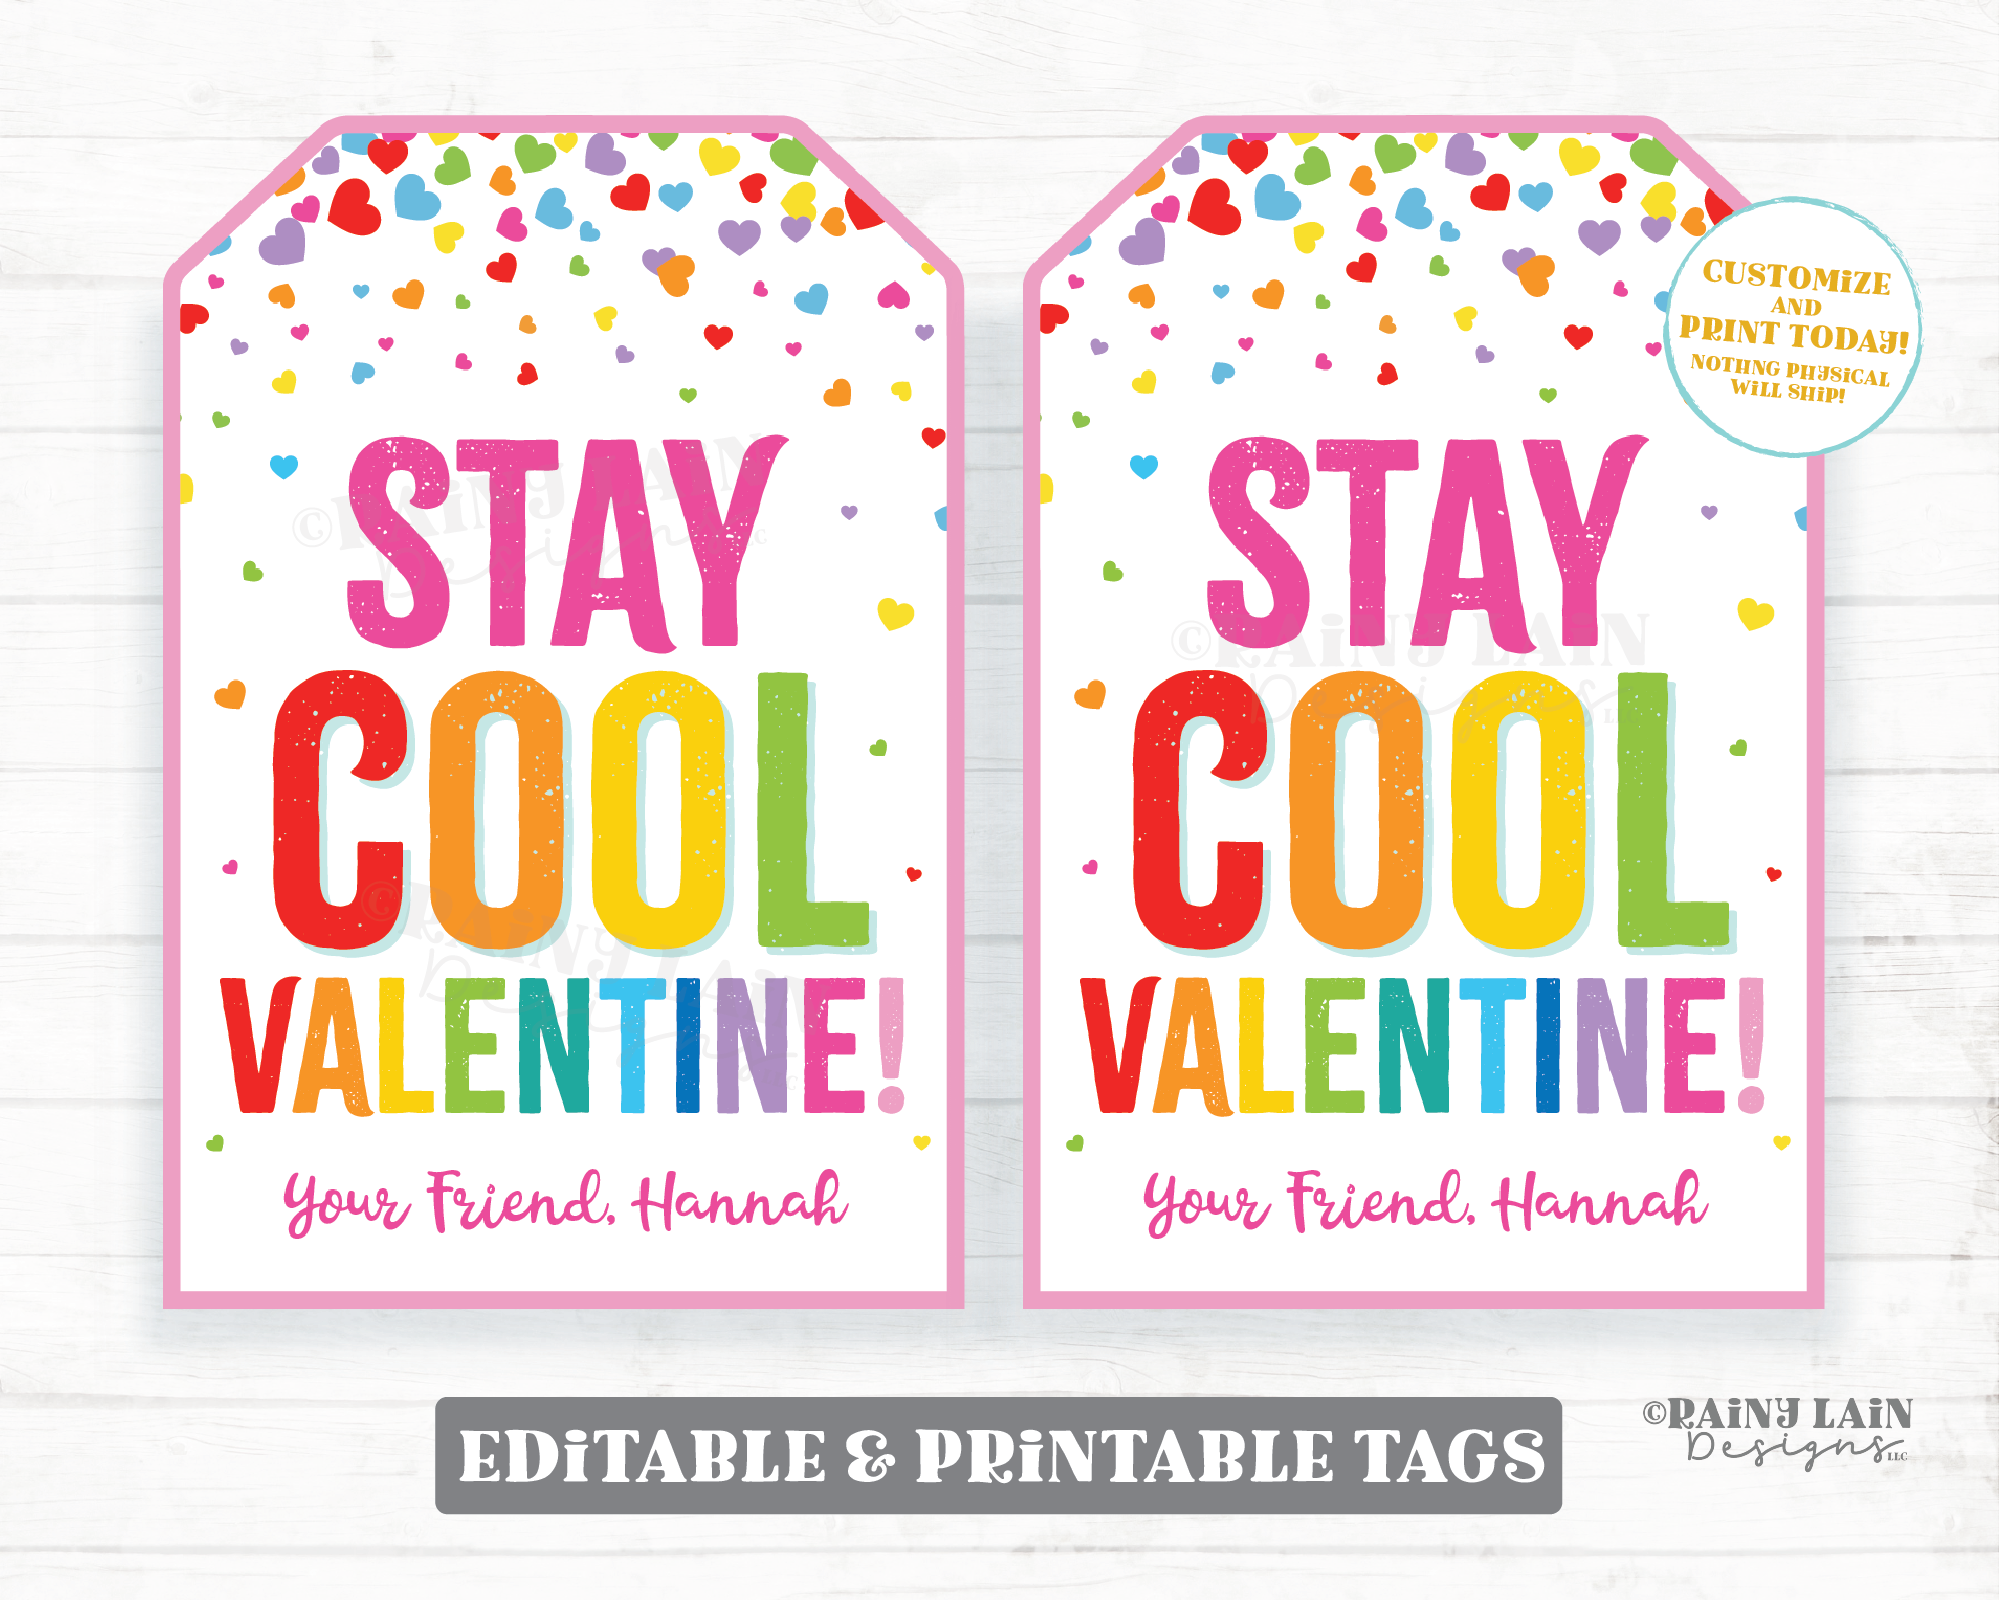 Stay Cool Valentine Tag Popsicle Sunglasses Sun Treat Valentine's Day Friend Gift Tag Preschool Classroom Printable Kids Editable Non-Candy